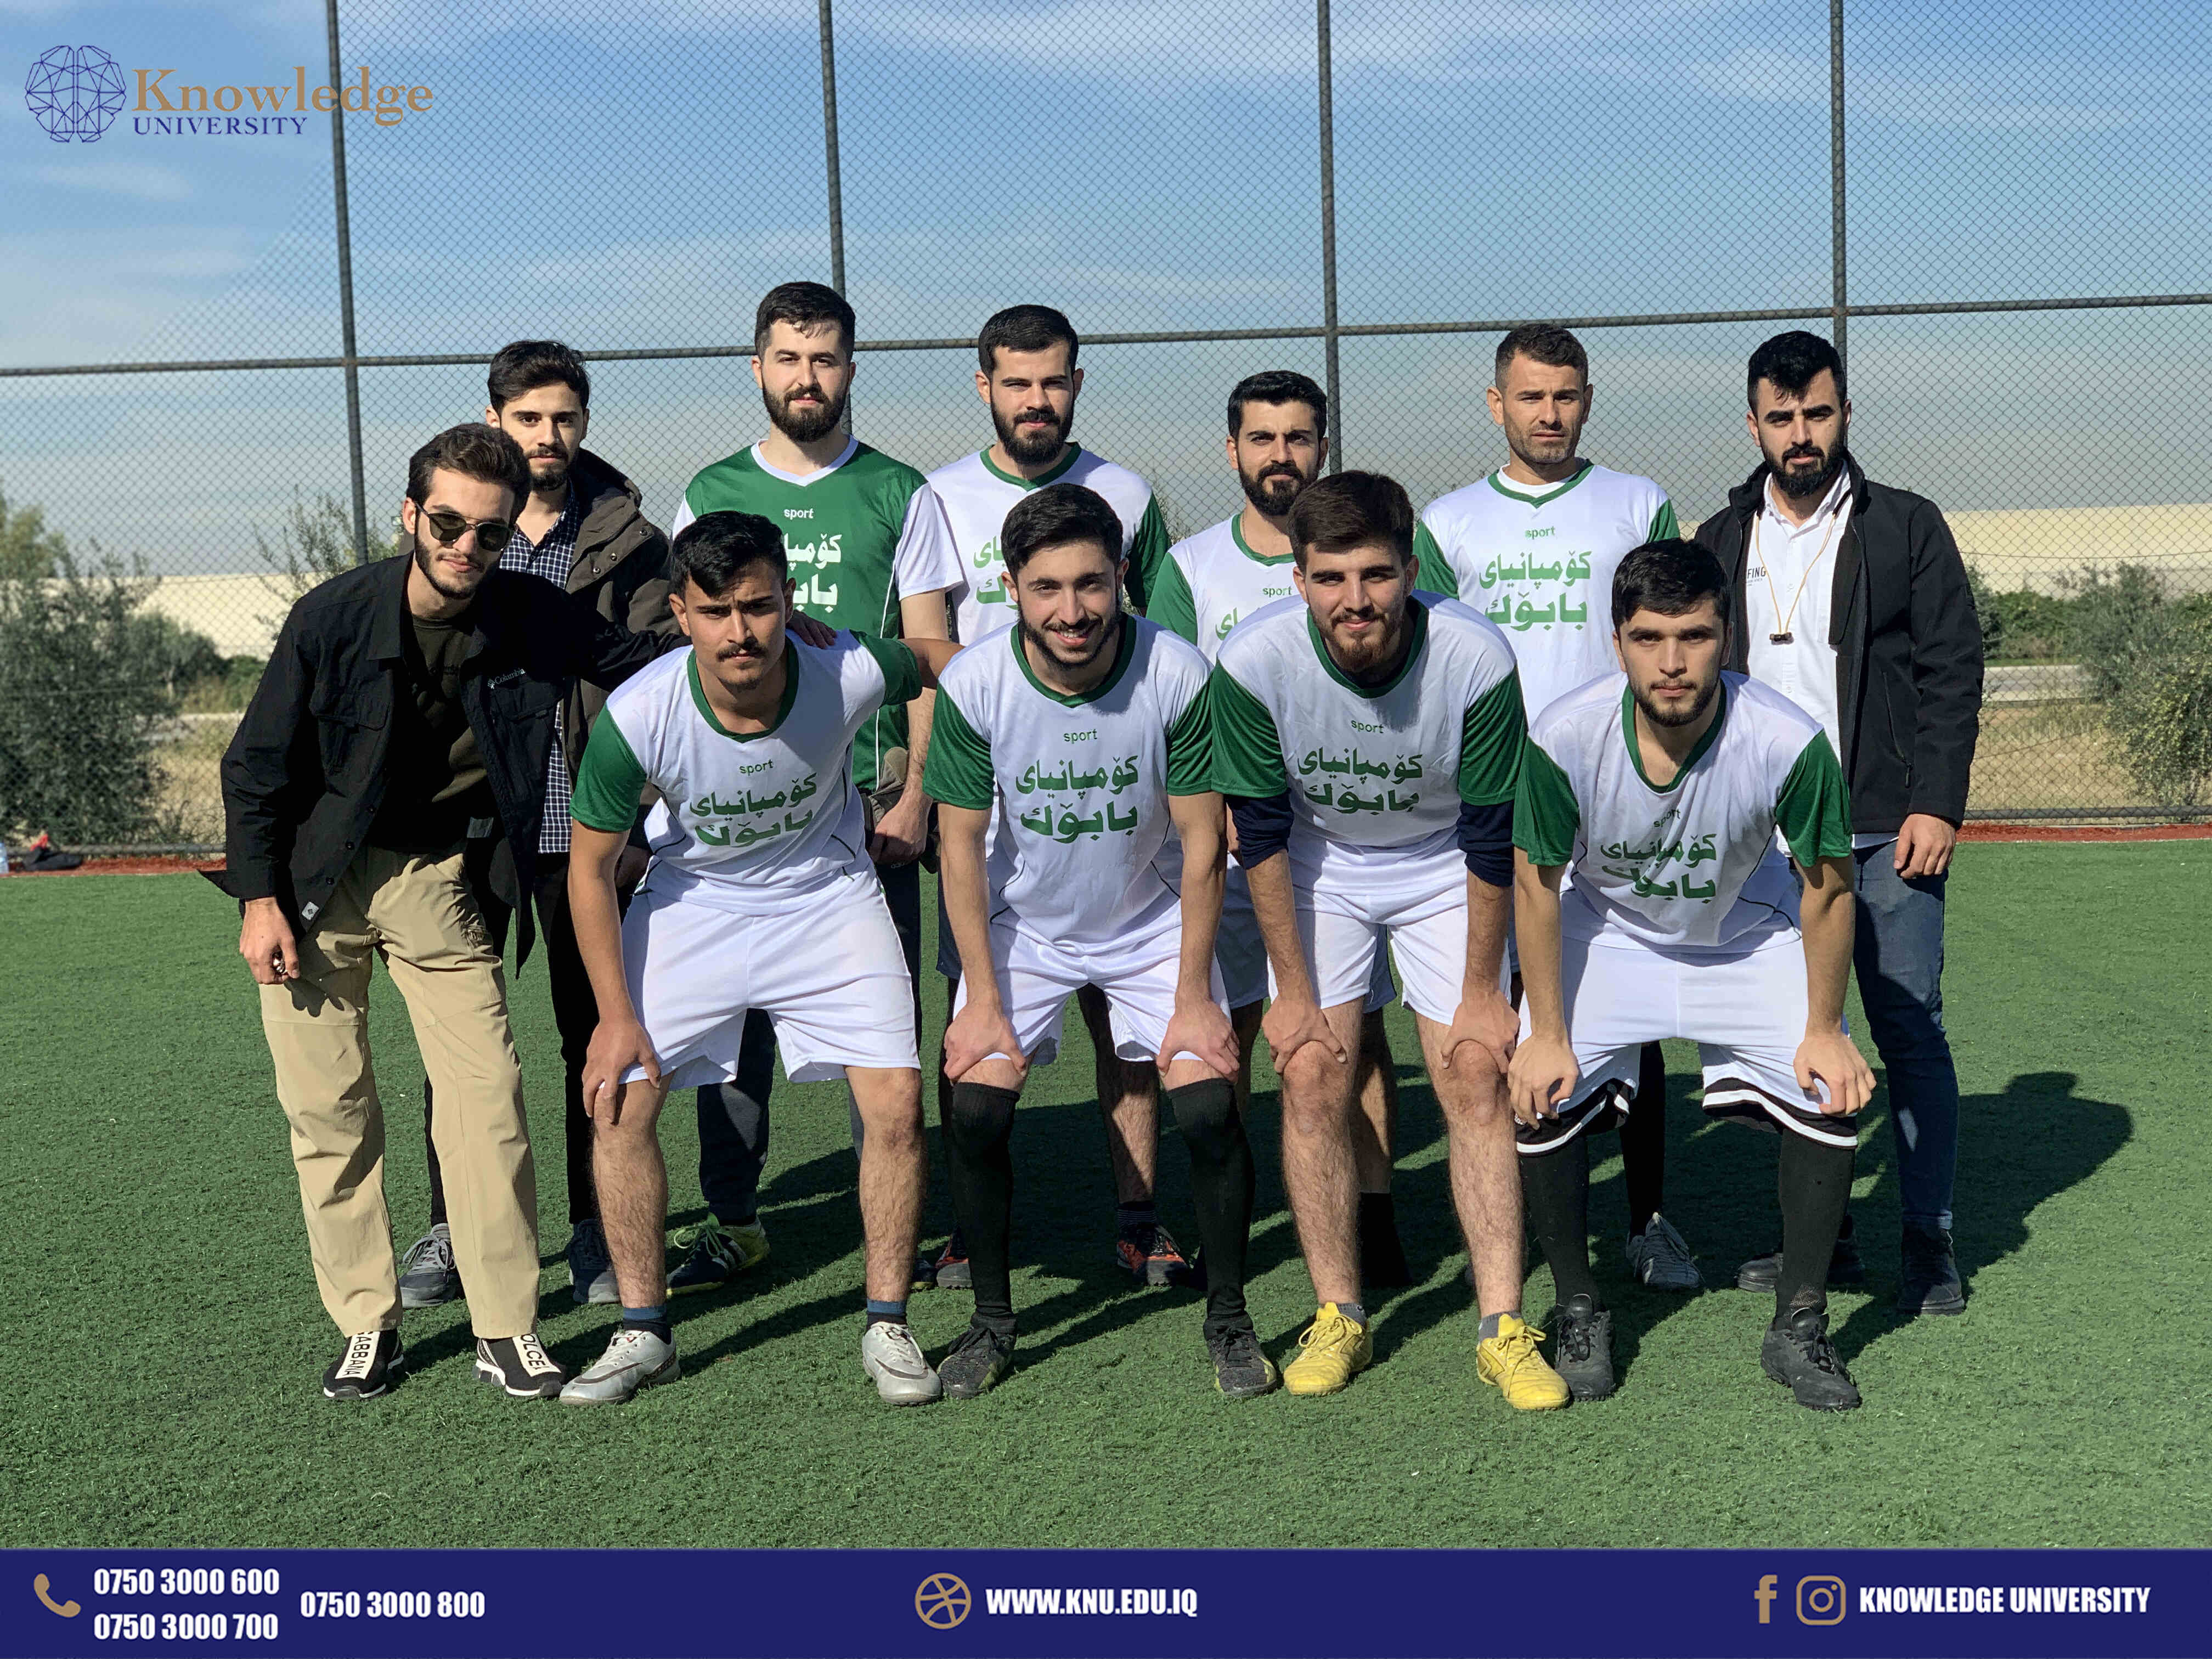 College of Engineering Celebrates the Final Match of a Football Tournament 